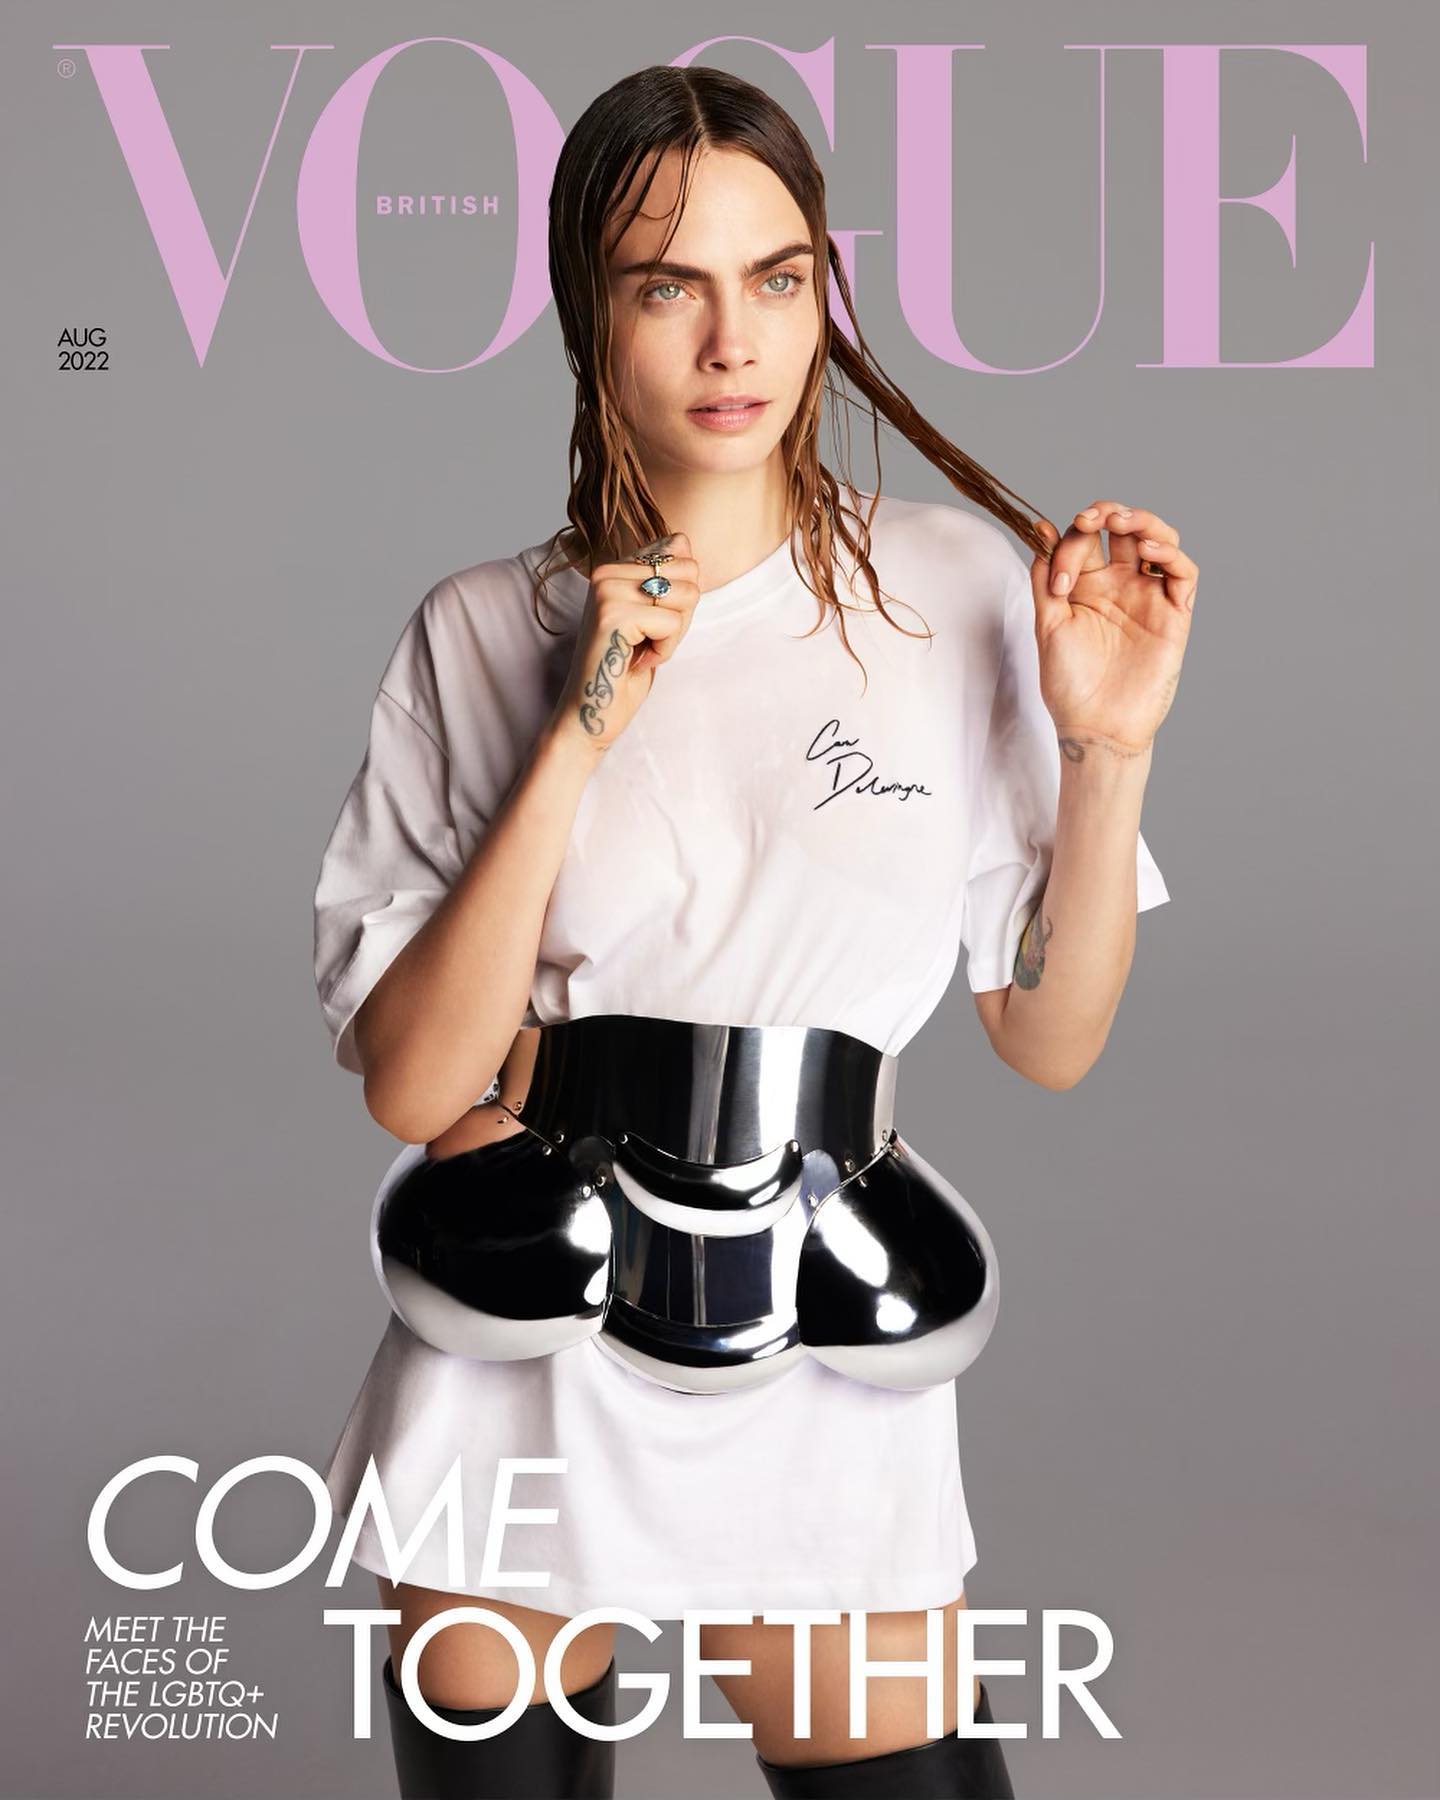 Cara Delevingne on the cover of British Vogue